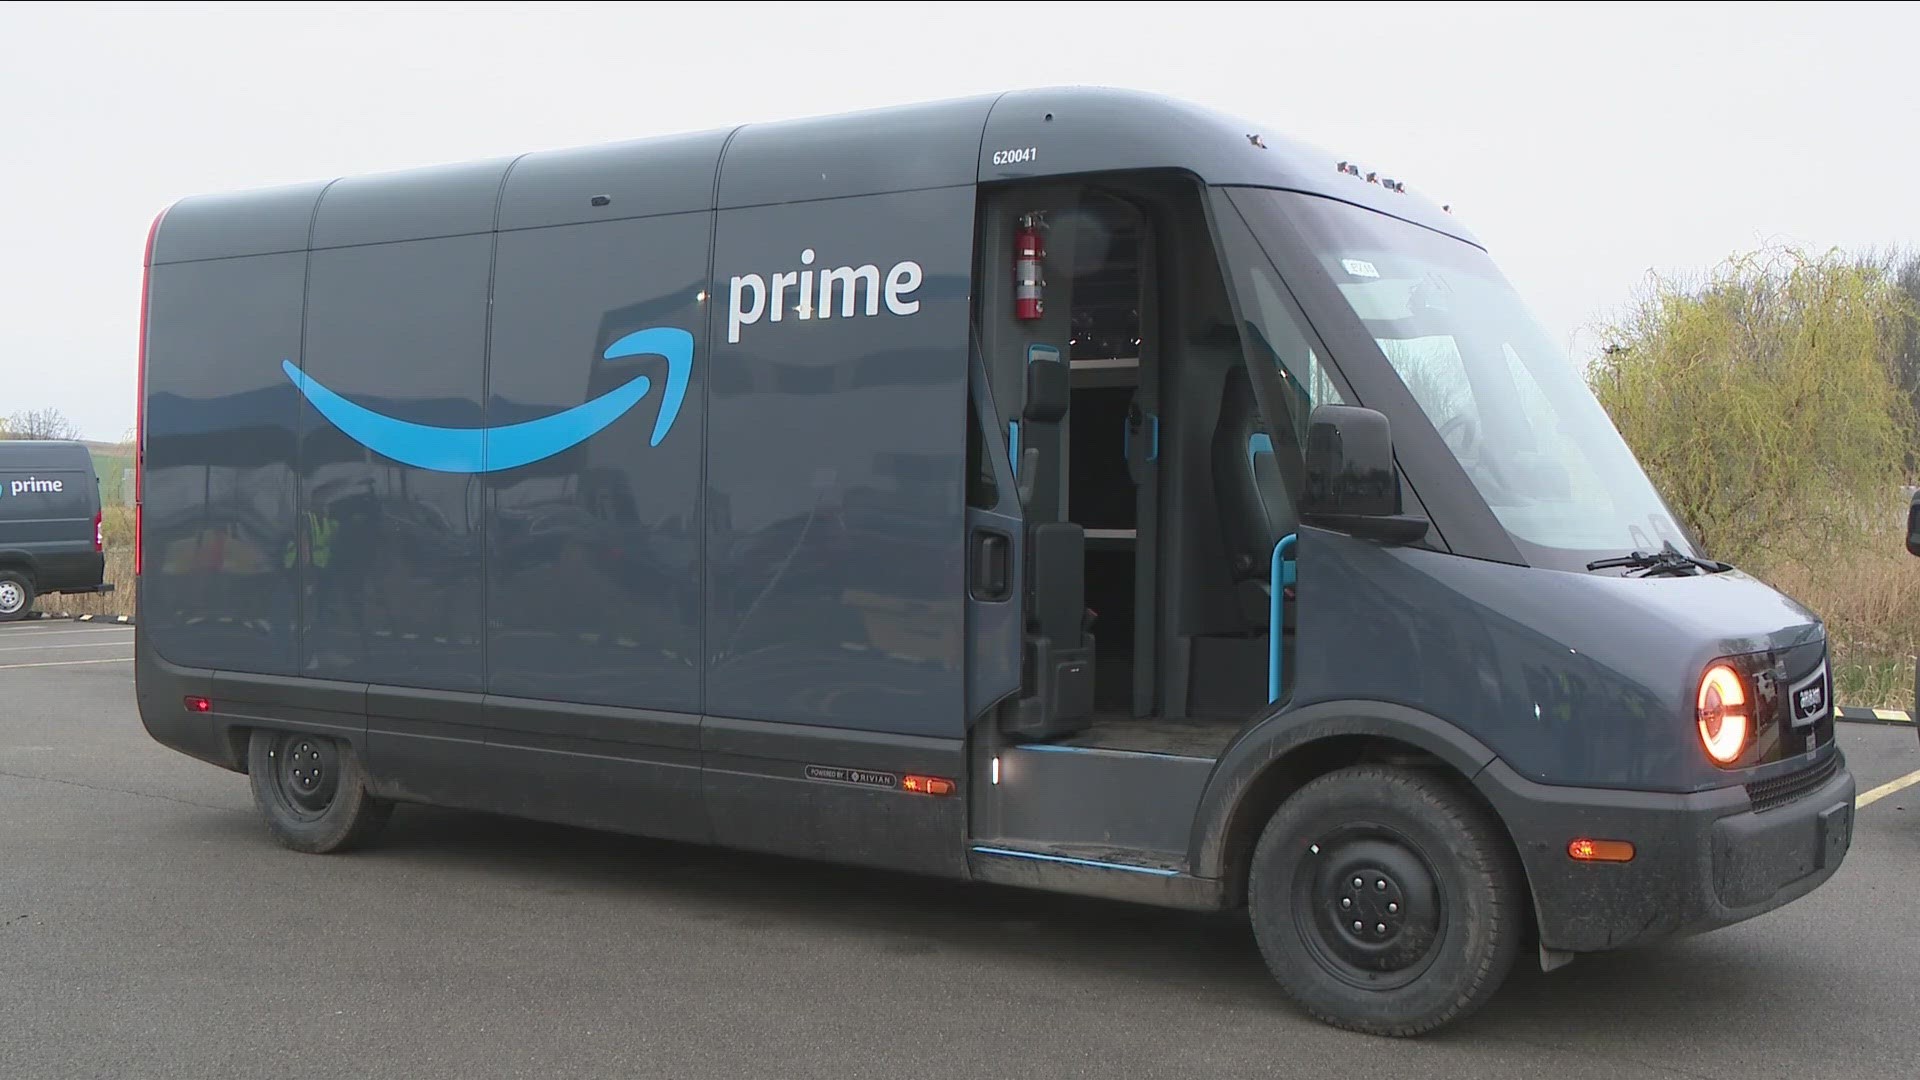 Your next Amazon package could be delivered in a more earth-conscious vehicle.